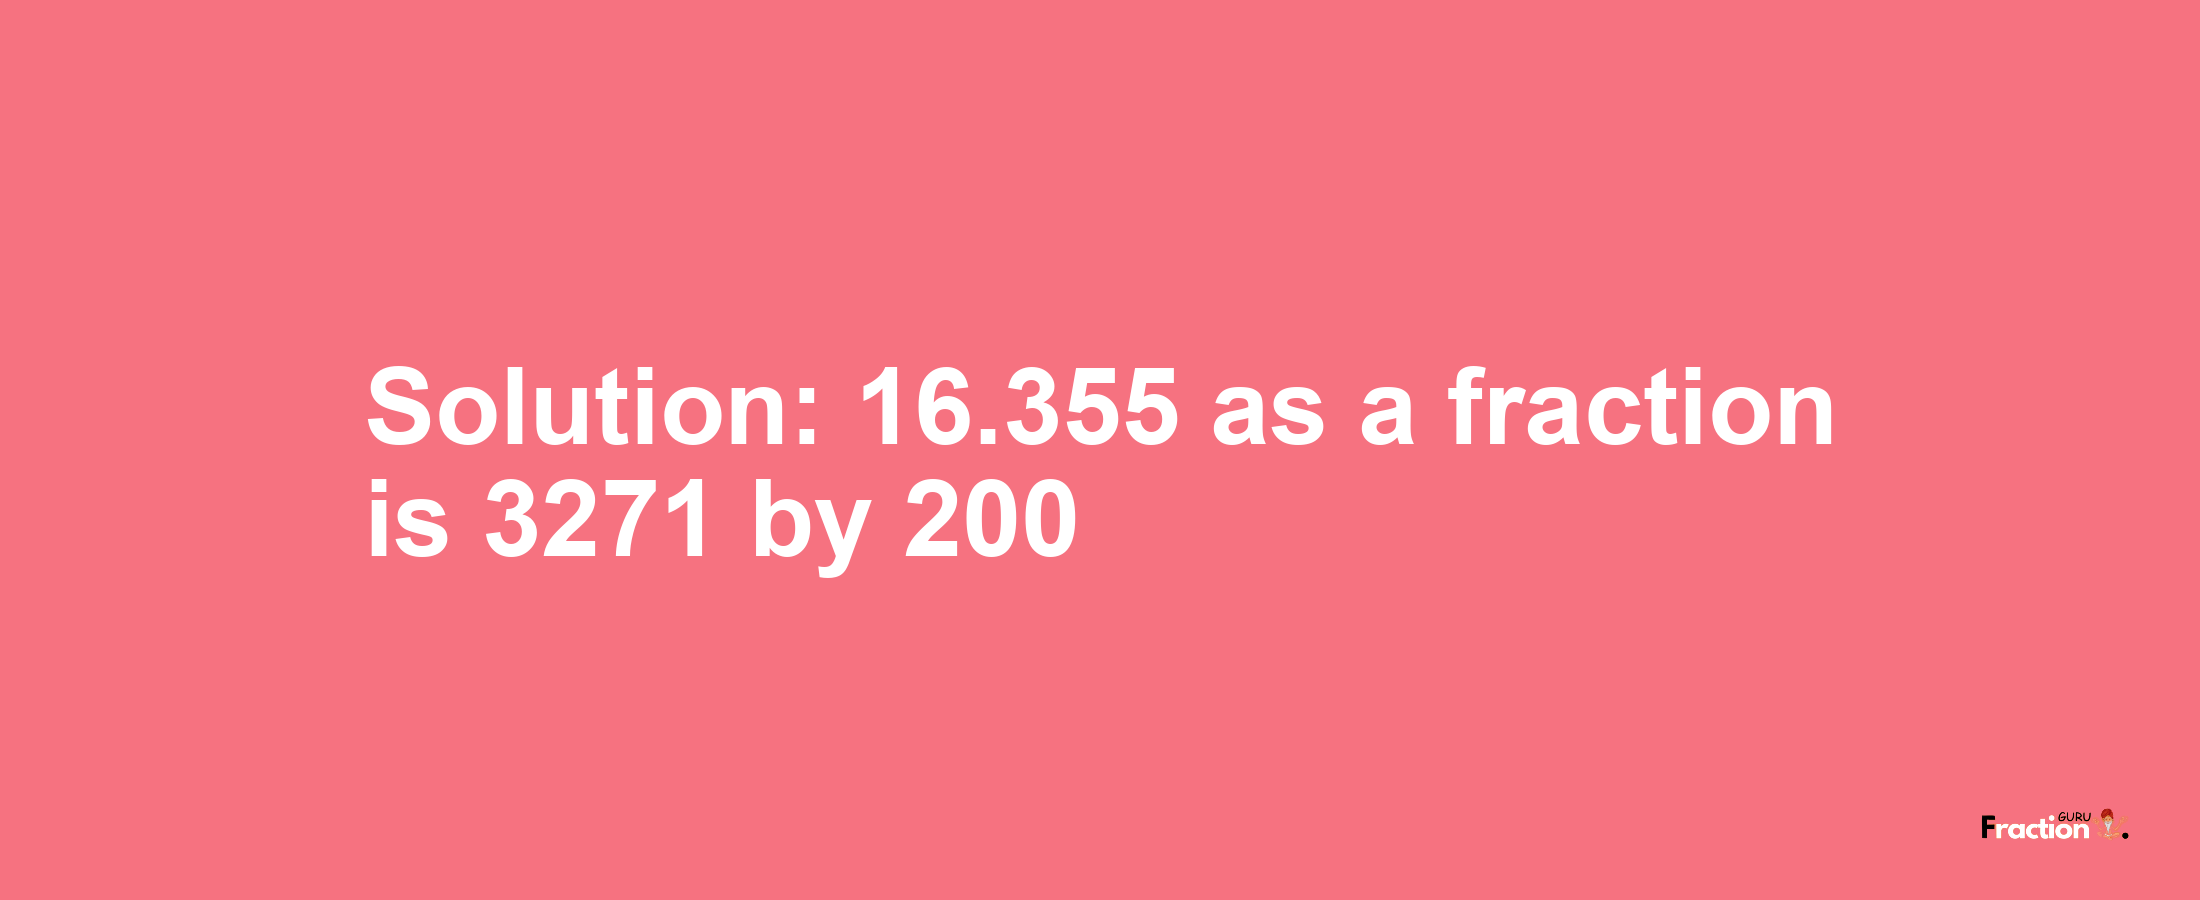 Solution:16.355 as a fraction is 3271/200